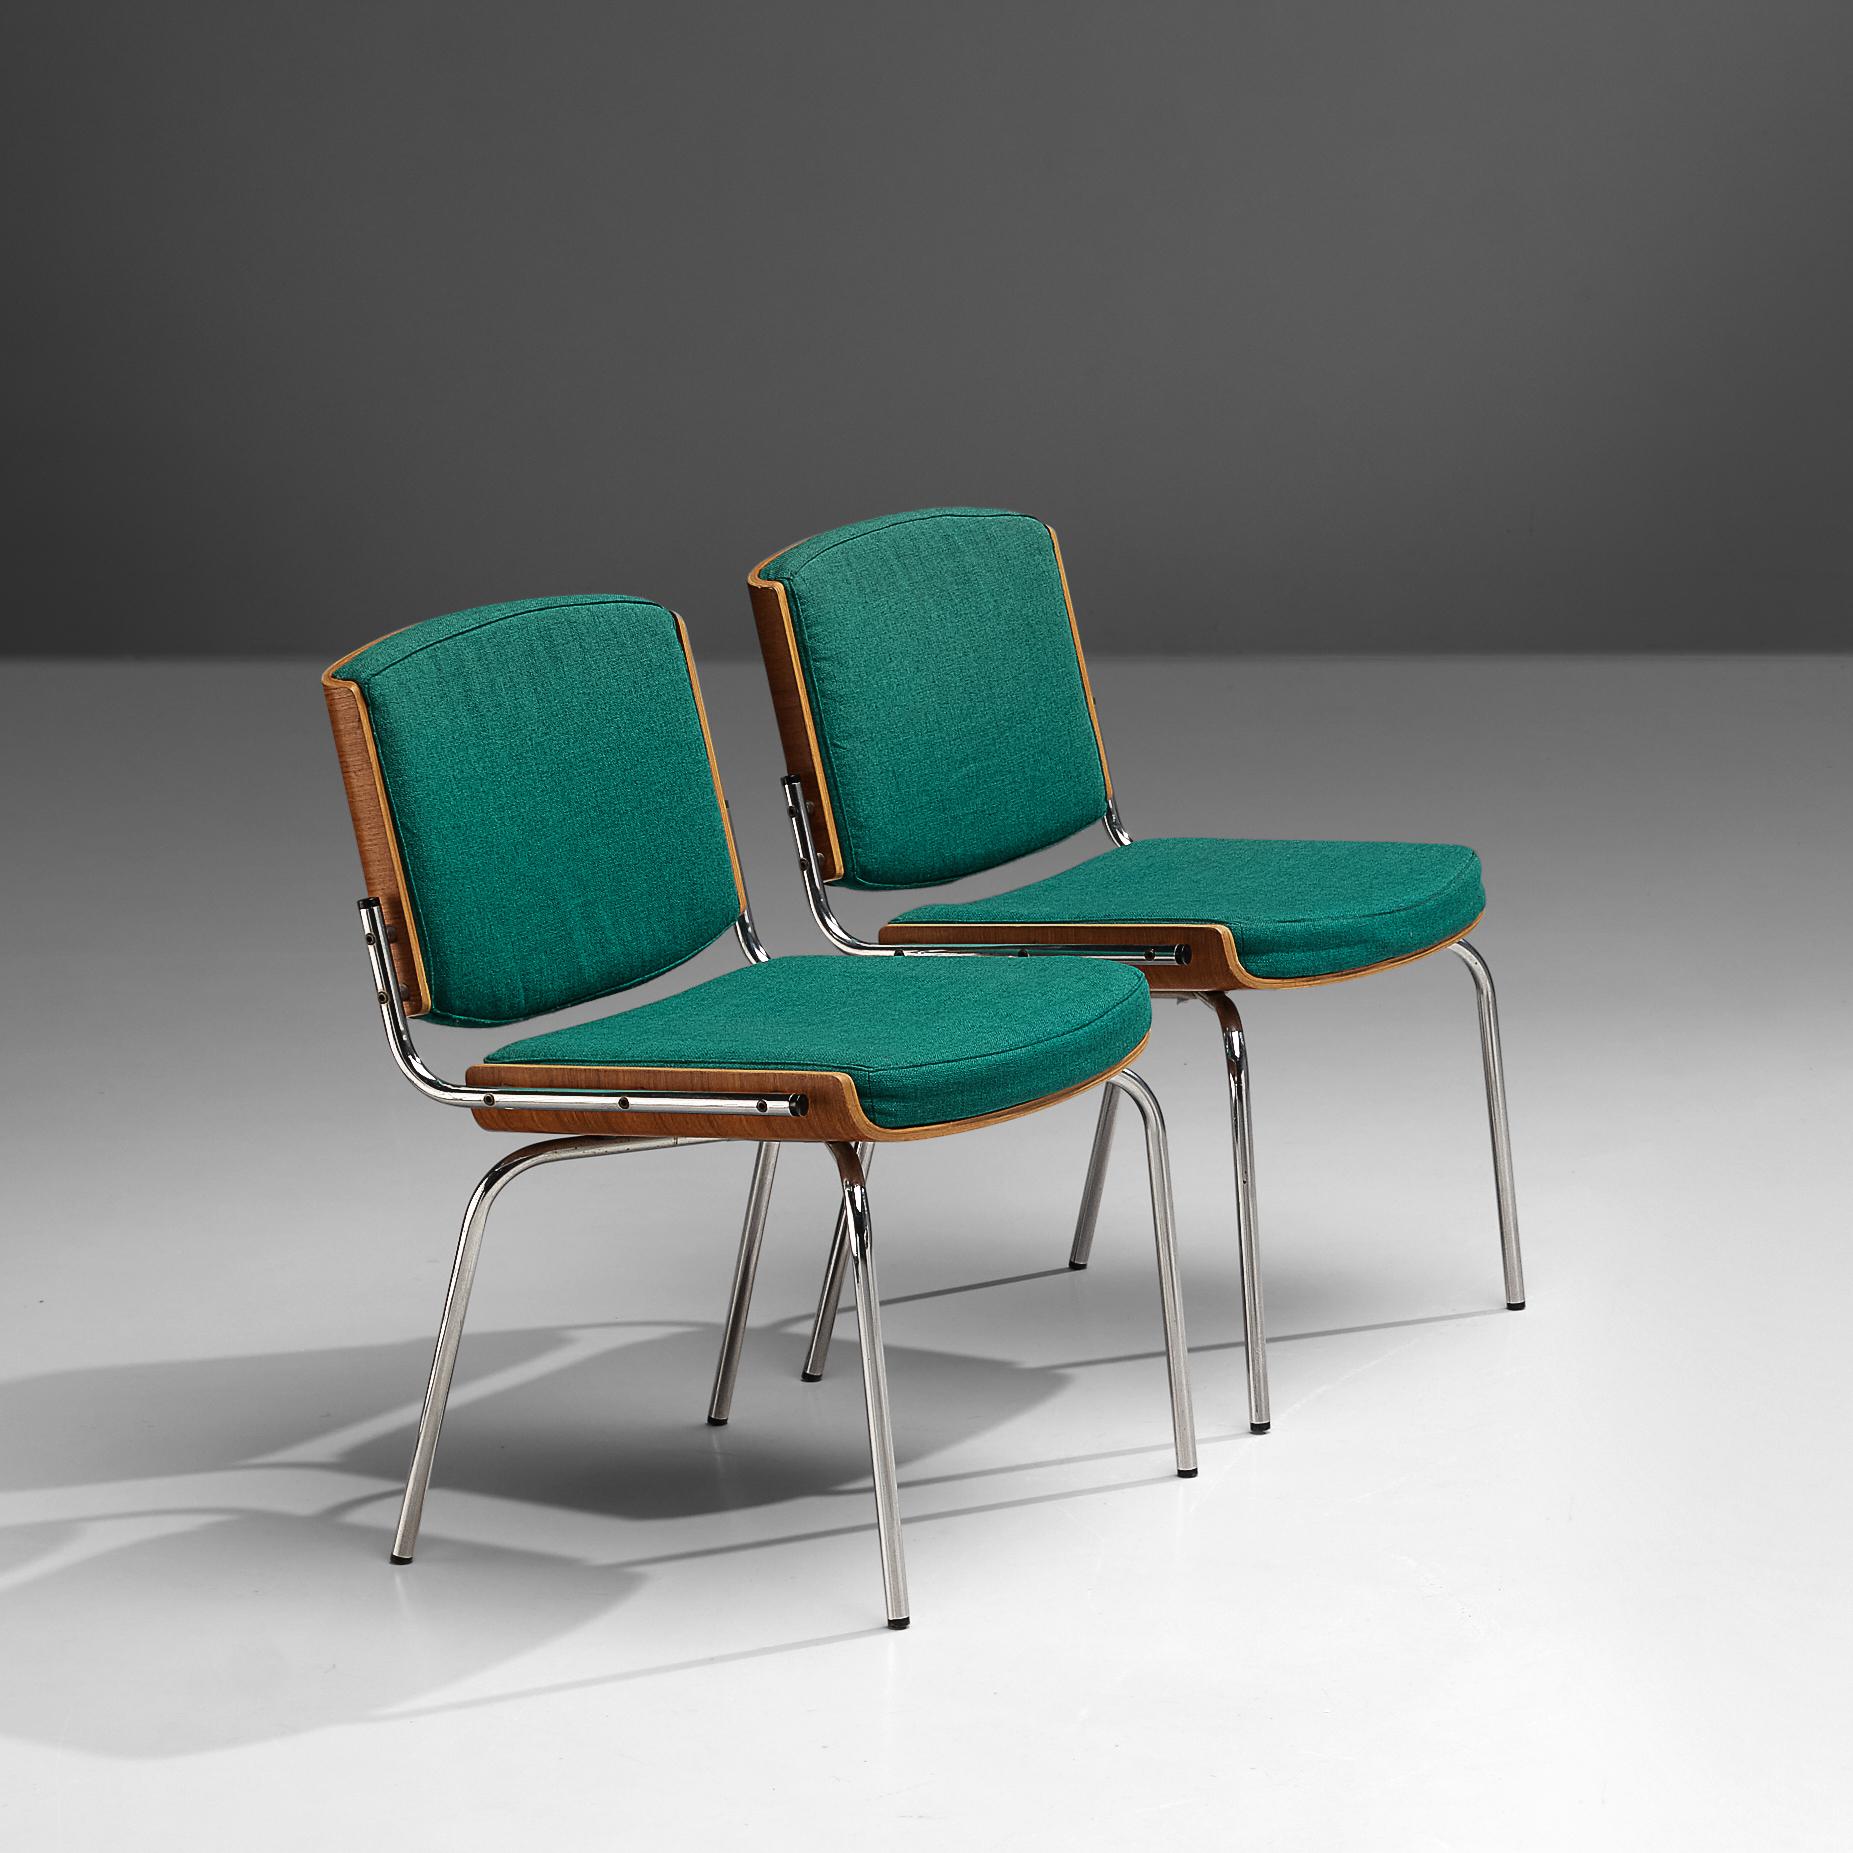 Chairs, teak, fabric, metal, Denmark, 1970s

The design features a striking combination of materials and textures. The back of the backrest and frame of the seat are made in wood. The green fabric upholstery combines wonderfully with the wood. The